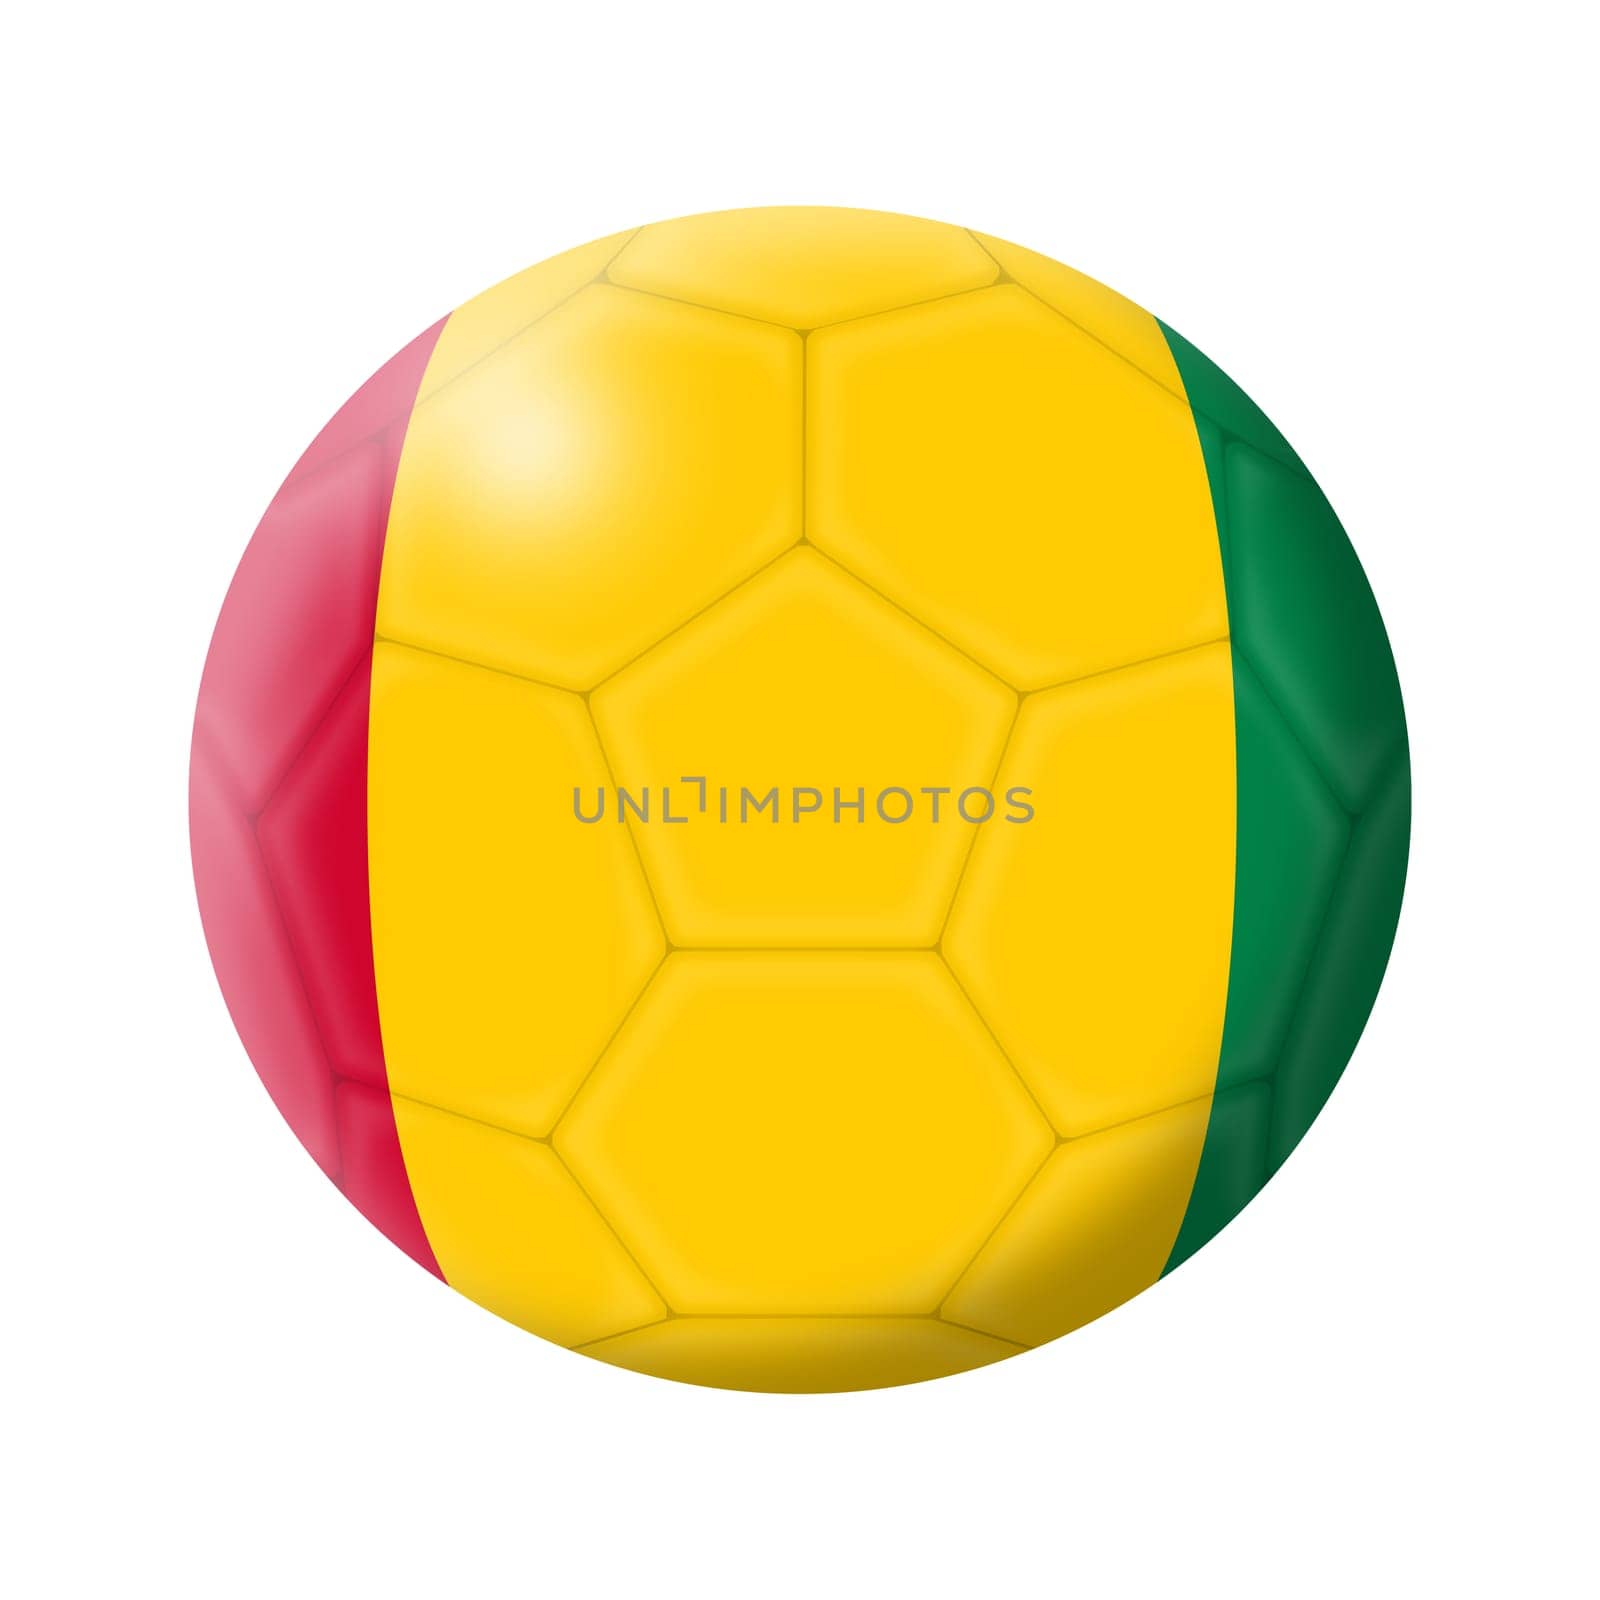 Guinea soccer ball football 3d illustration by VivacityImages